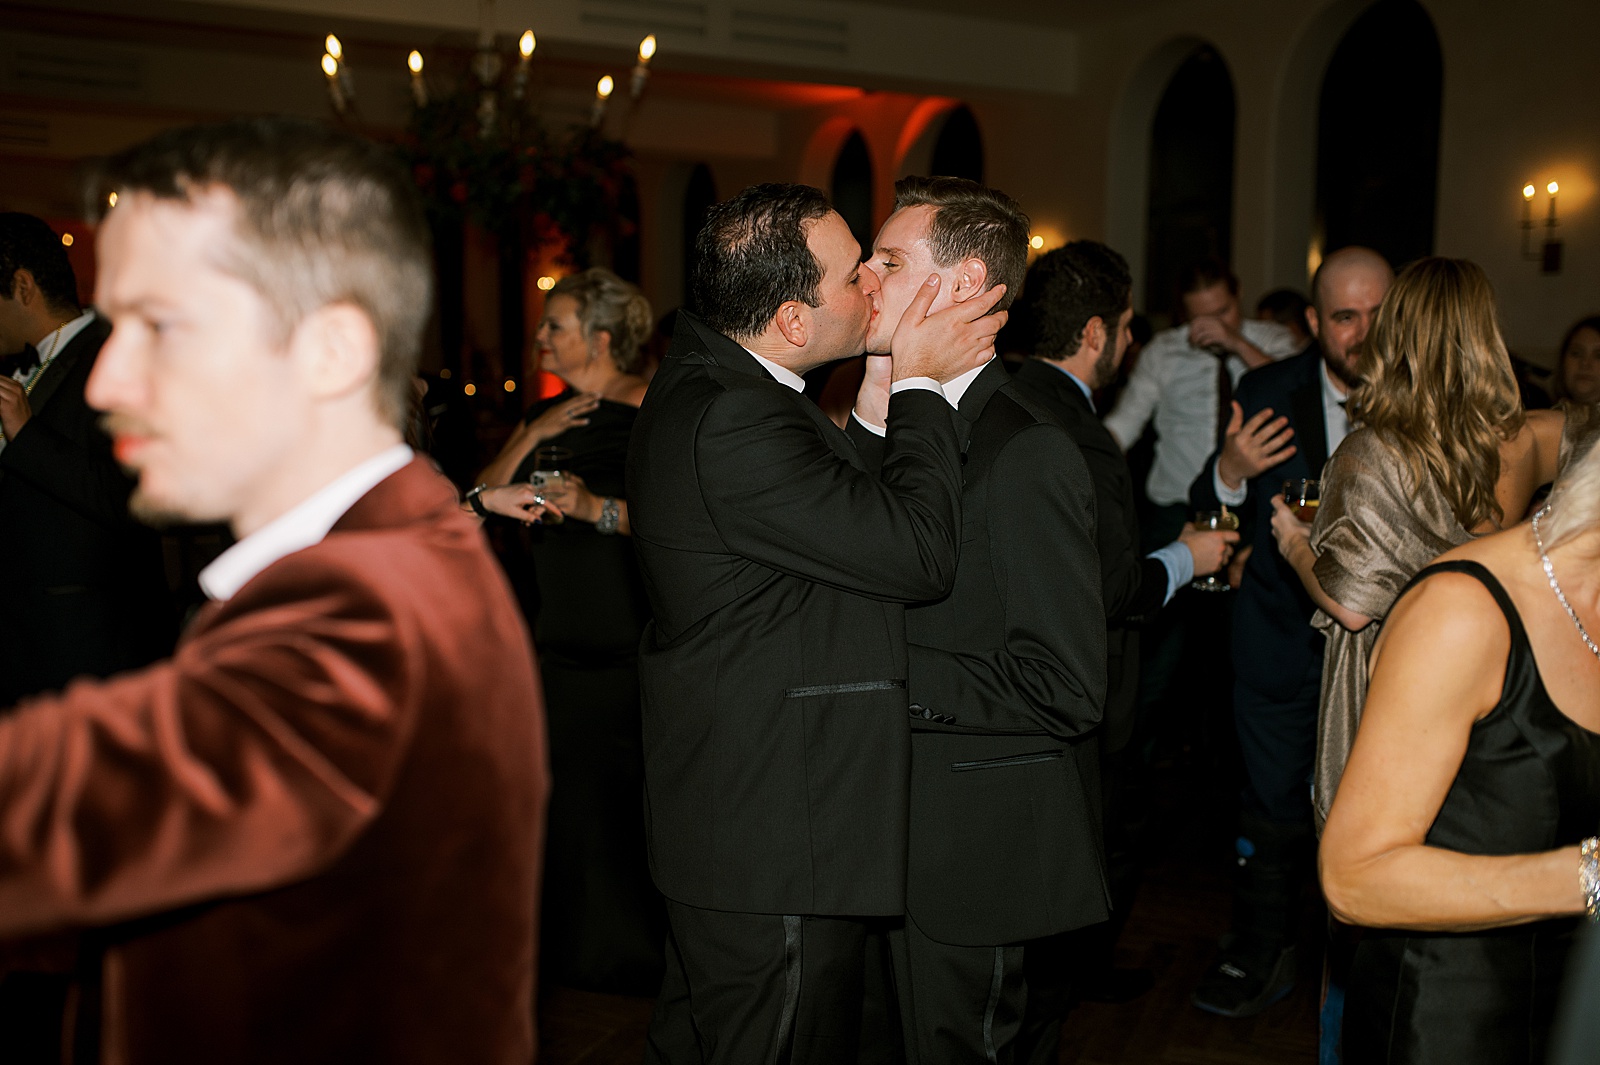 Two men kiss while people dance around them at a wedding reception.